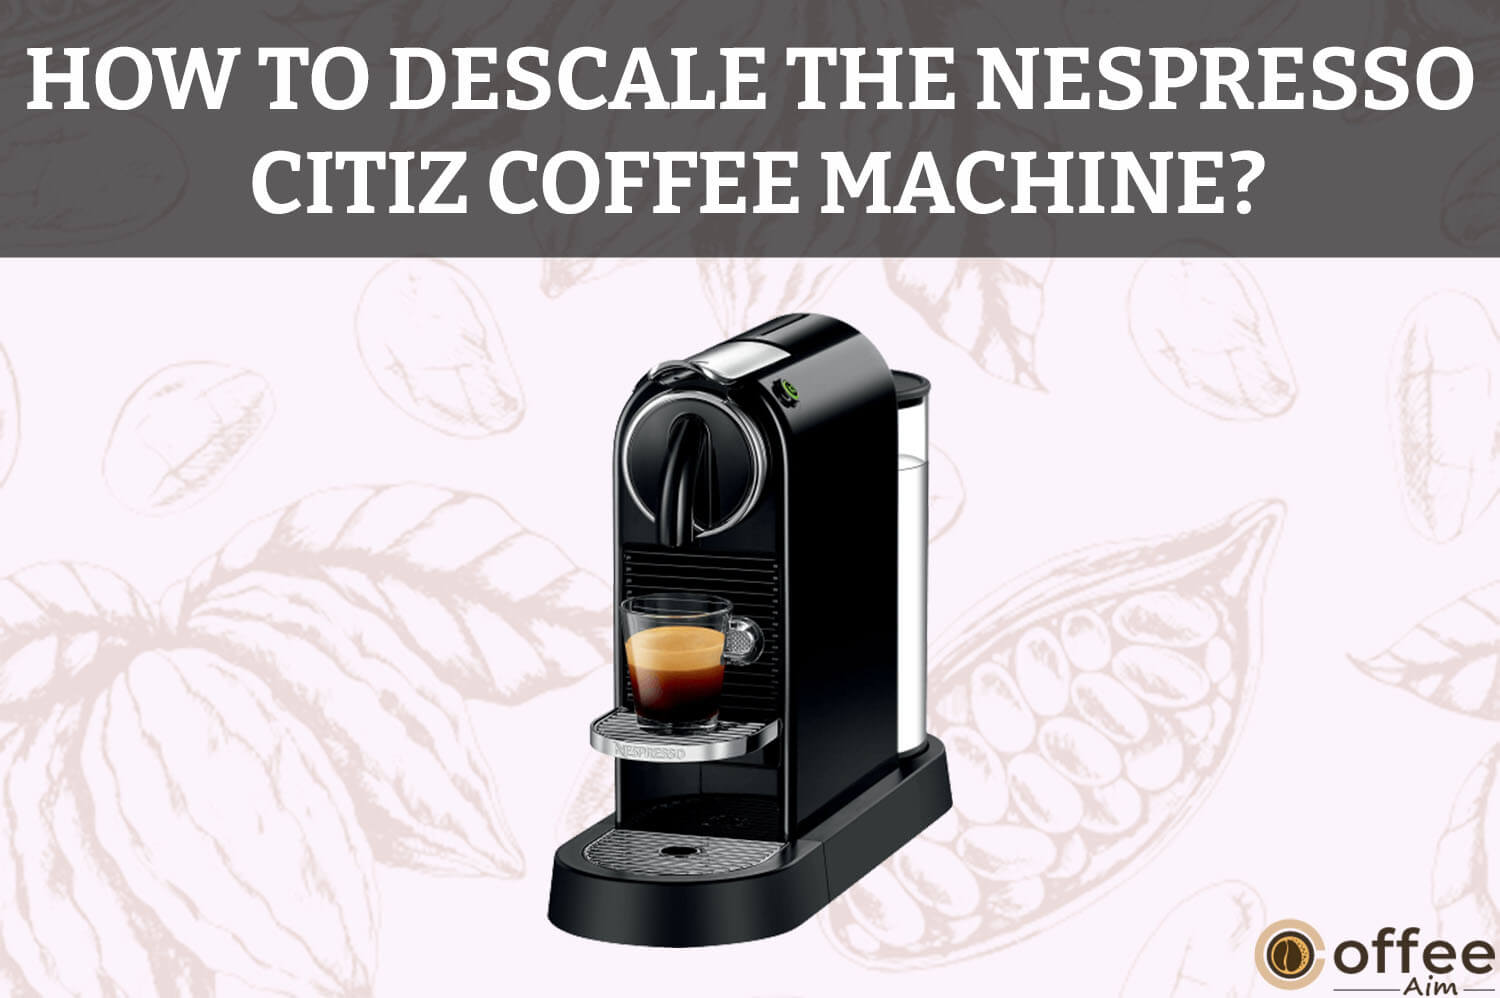 Feature image for the article "How To Descale The Nespresso Citiz Coffee Machine"